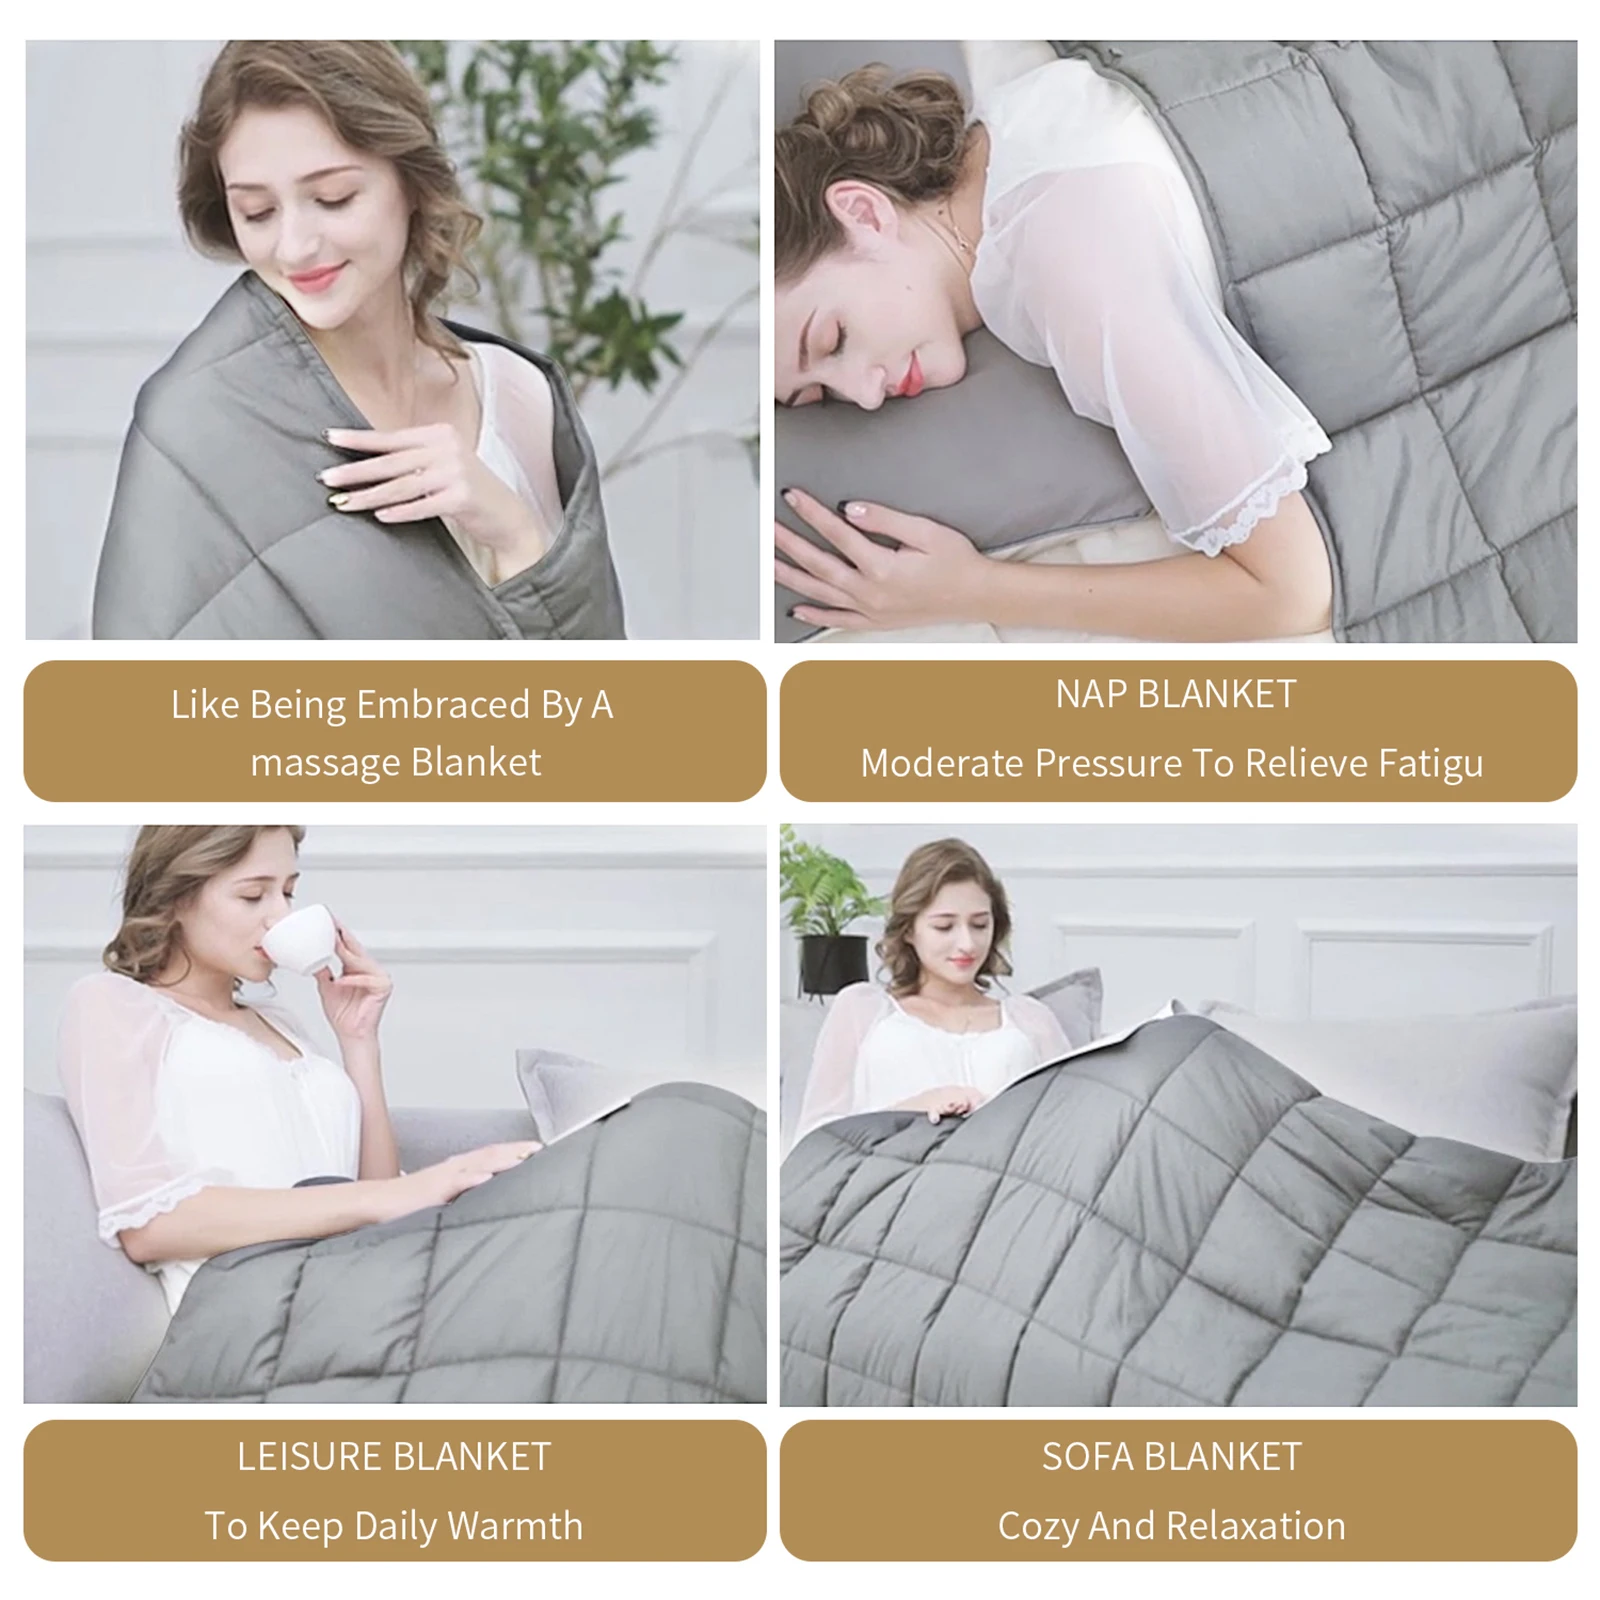 Adult 6.8kg/9kg Weighted Blanket Full Queen Size Cotton Cover Reduce Anxiety Quilt Sadoun.com